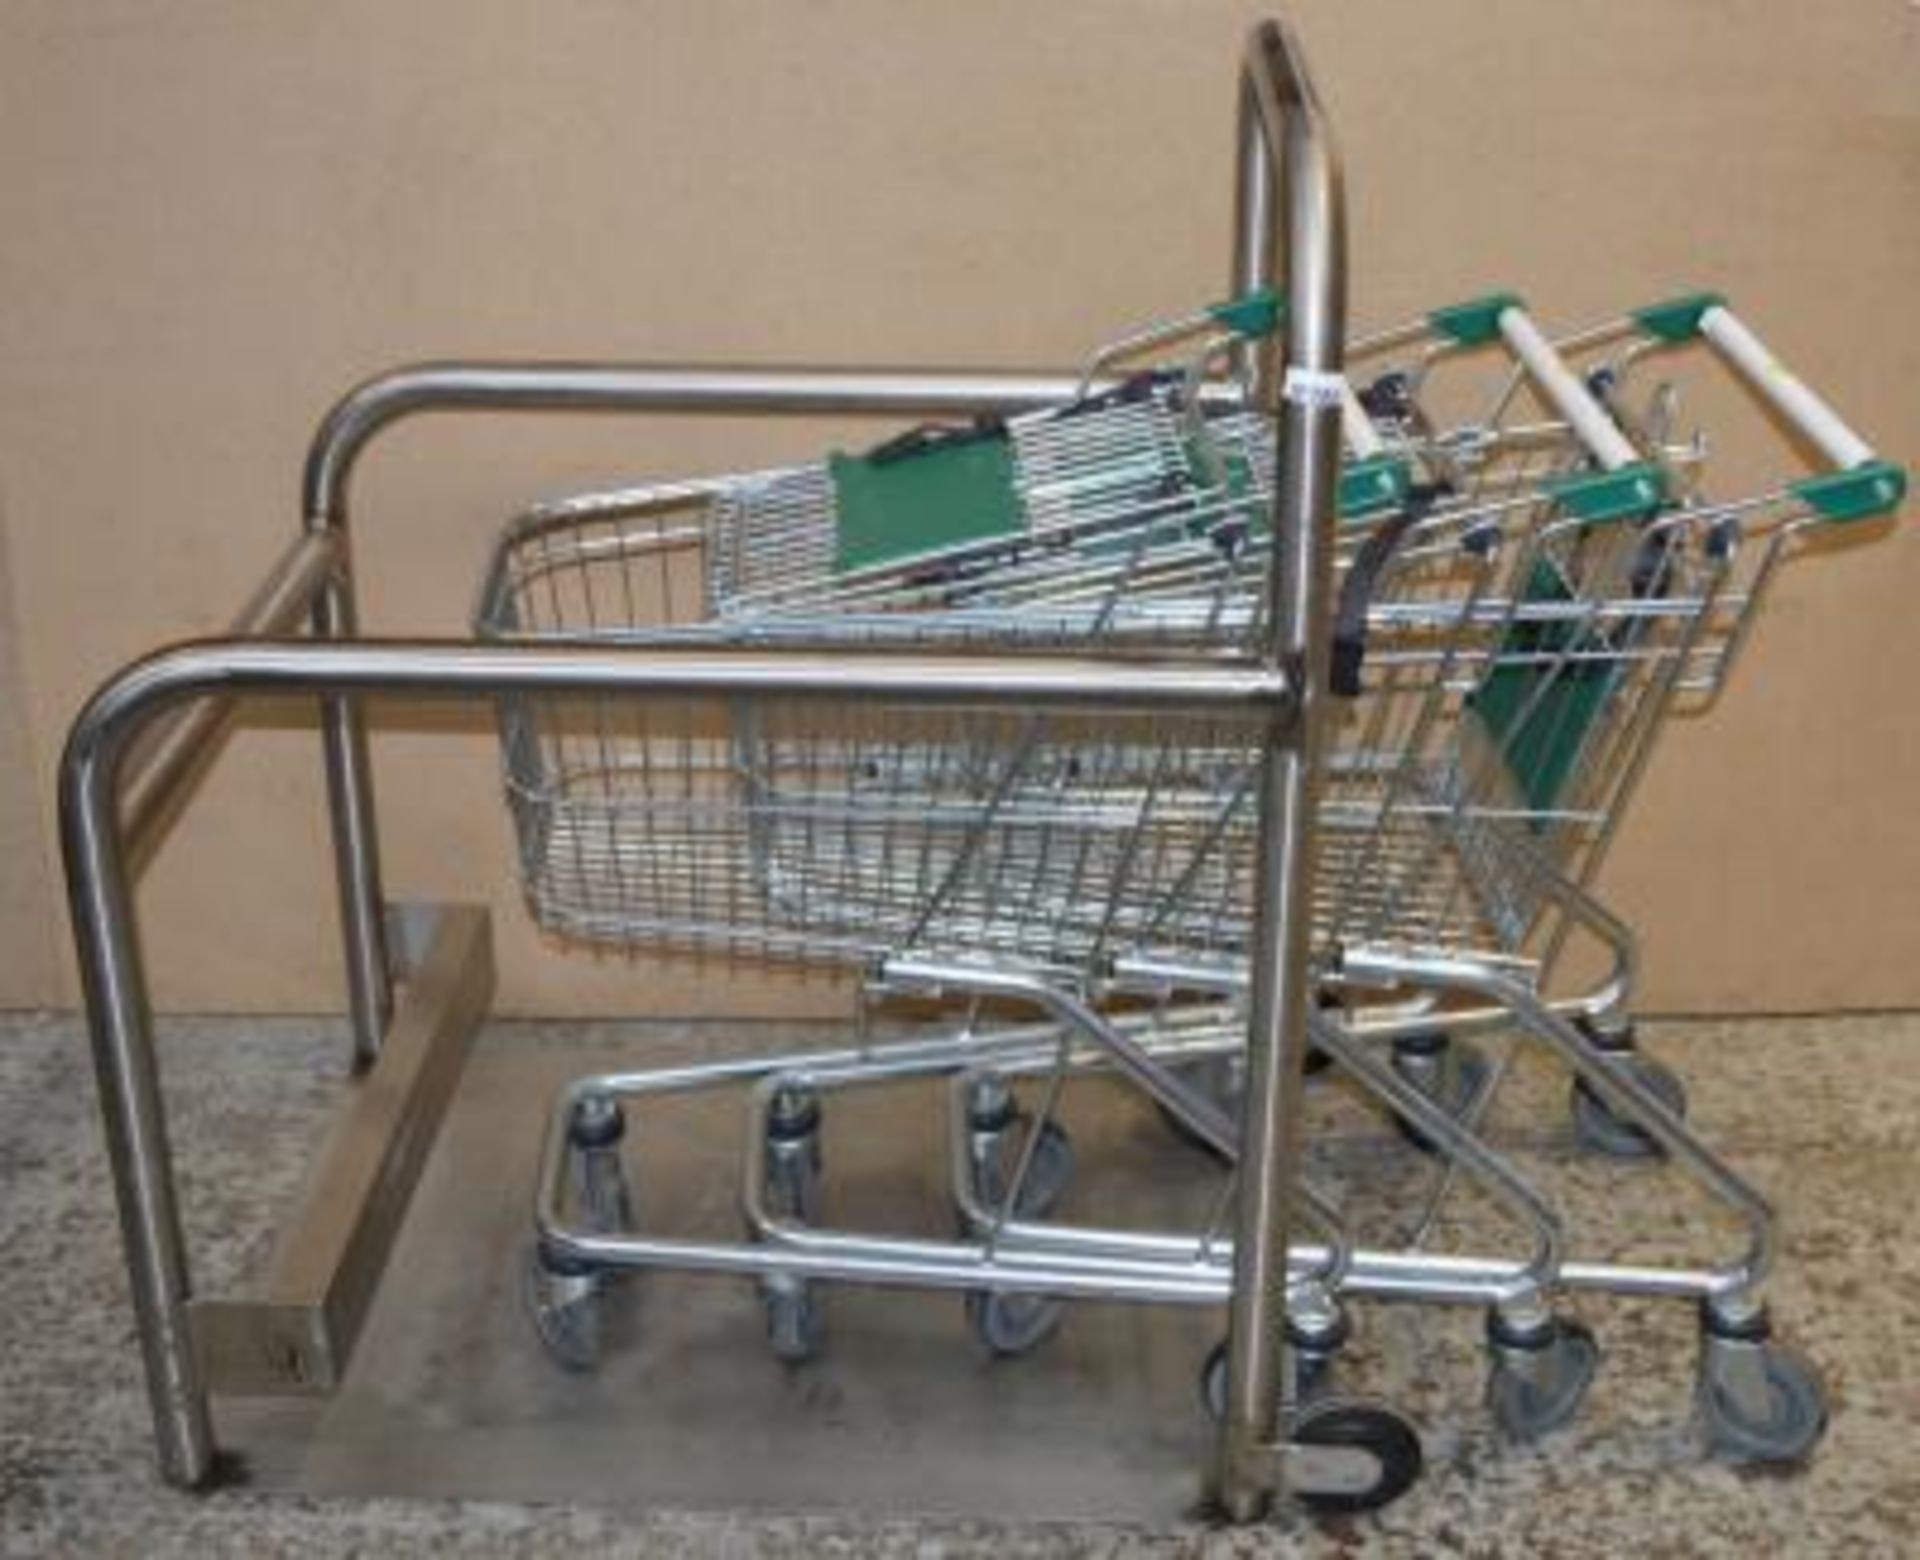 1 x Row Shopping Trolley Docking Station With Three Wanzl 60kg Capacity Shopping Trolleys - Features